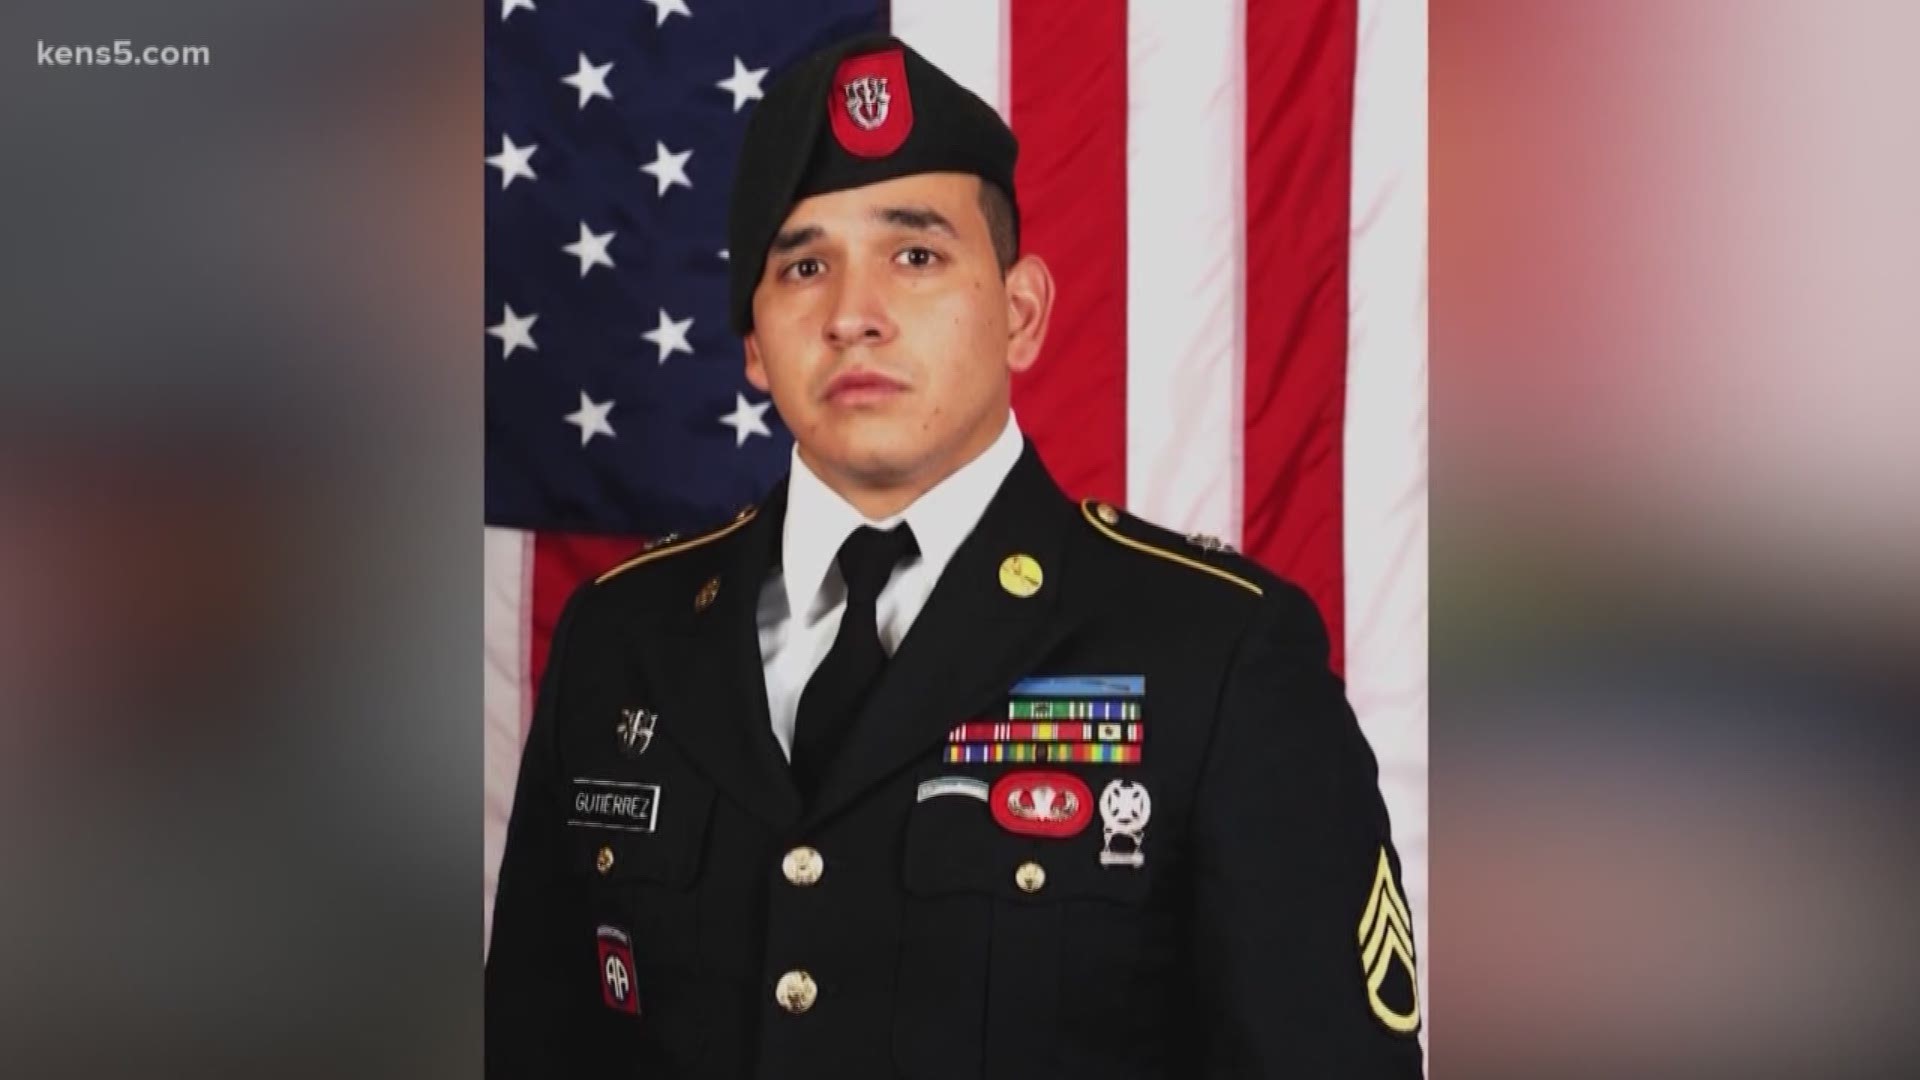 Sgt. First Class Javier Gutierrez was one of two men who died during an attack on Feb. 8.